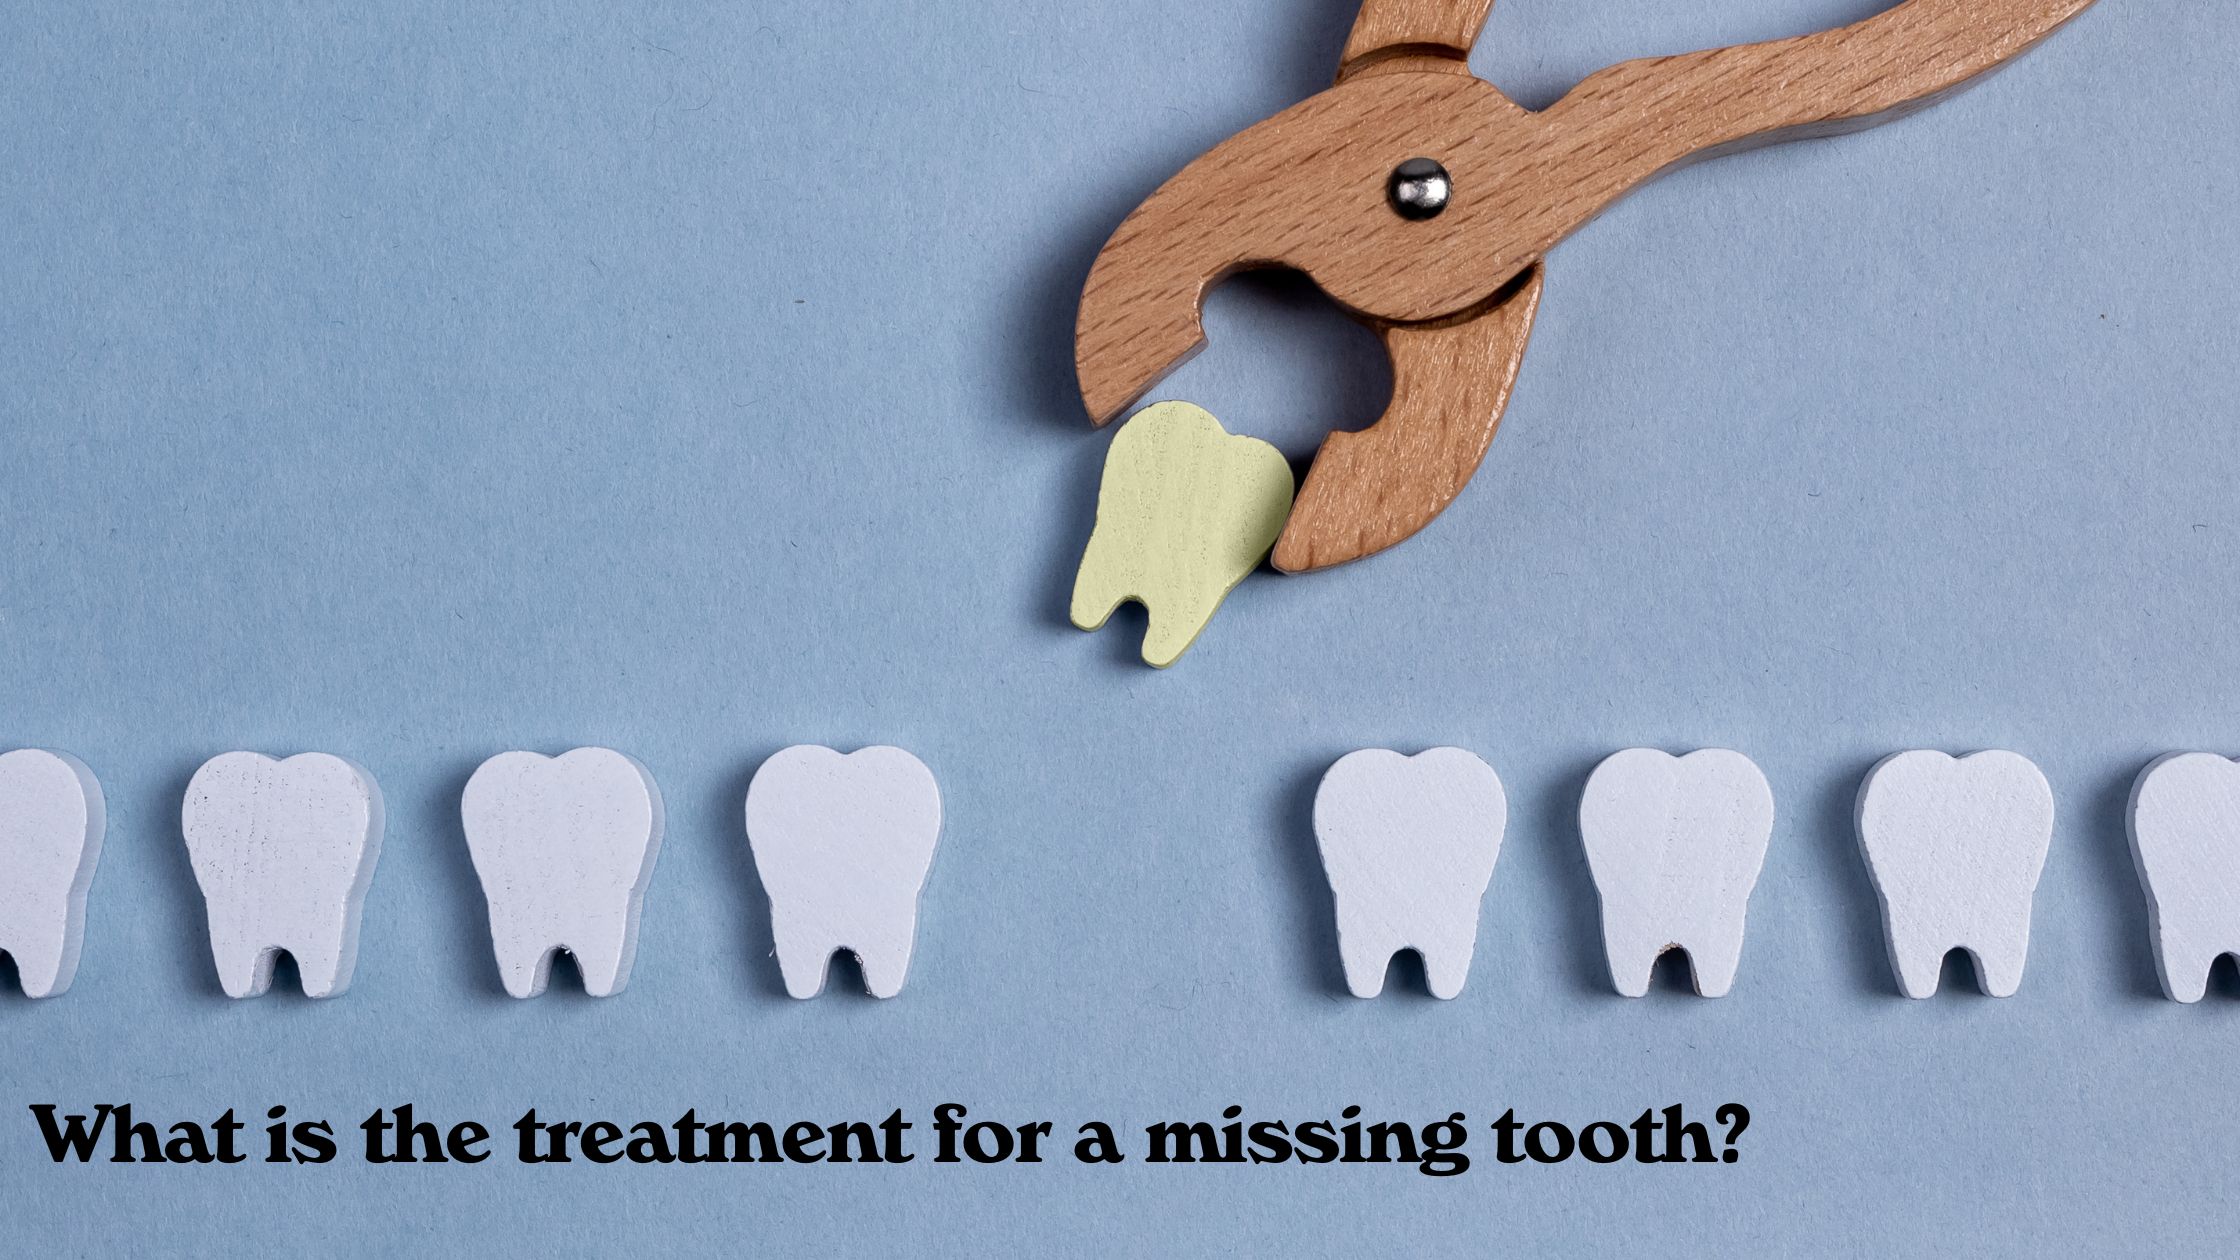 What is the treatment for a missing tooth?